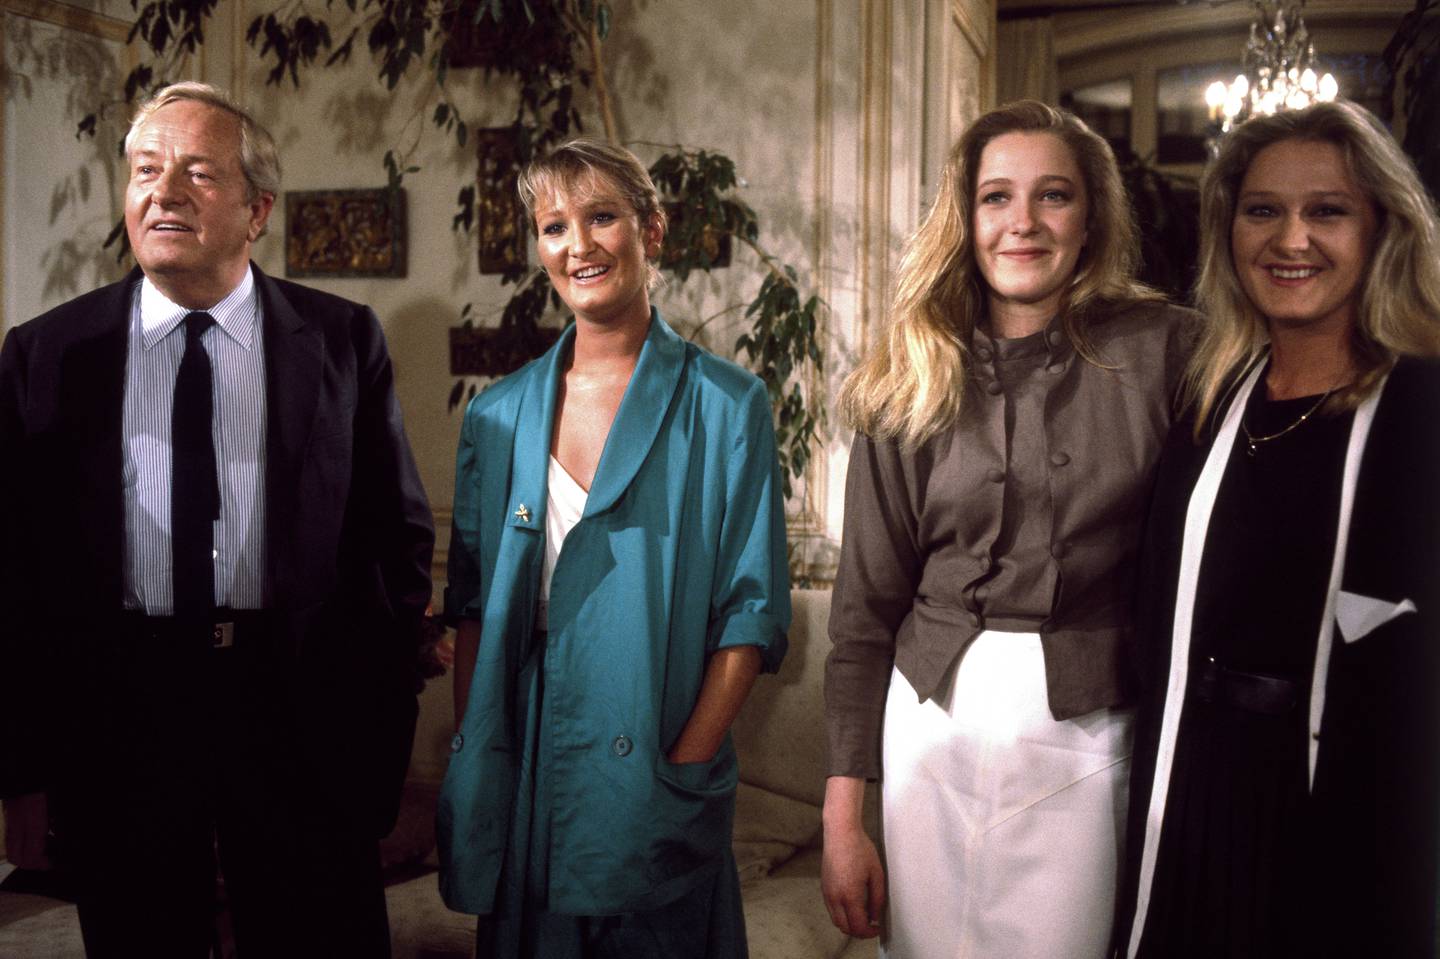 Jean-Marie Le Pen with his daughters Yann, Marine and Marie-Caroline in 1986. Getty Images